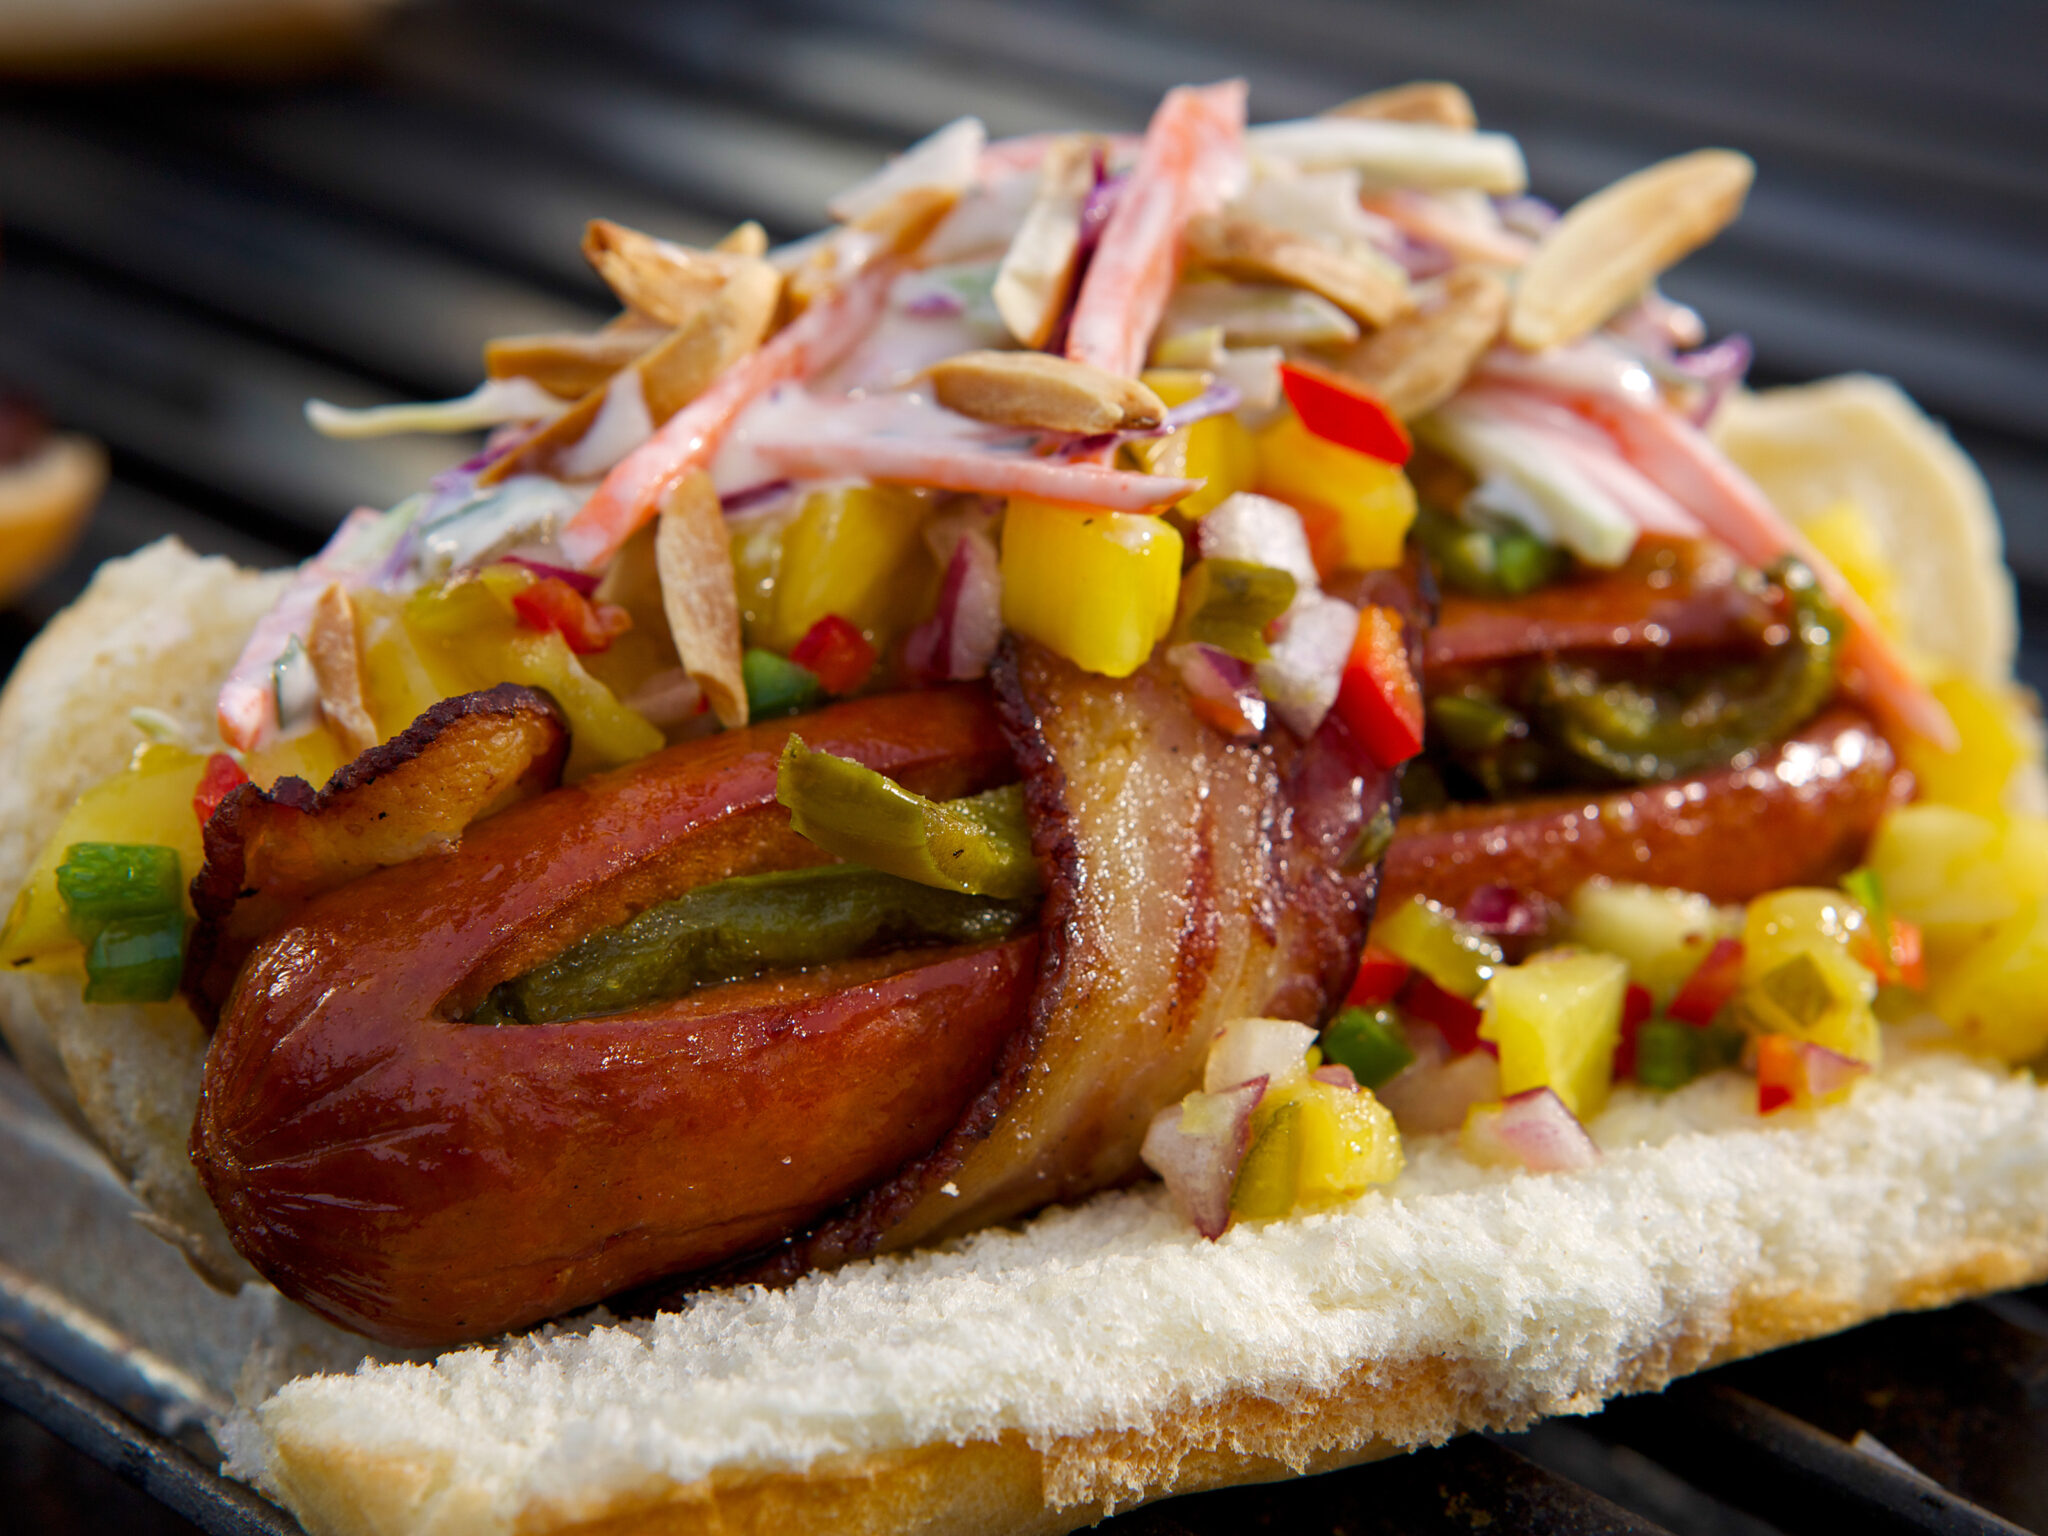 Guy Fieri’s “Danger Dogs with Spicy Fruit Relish”